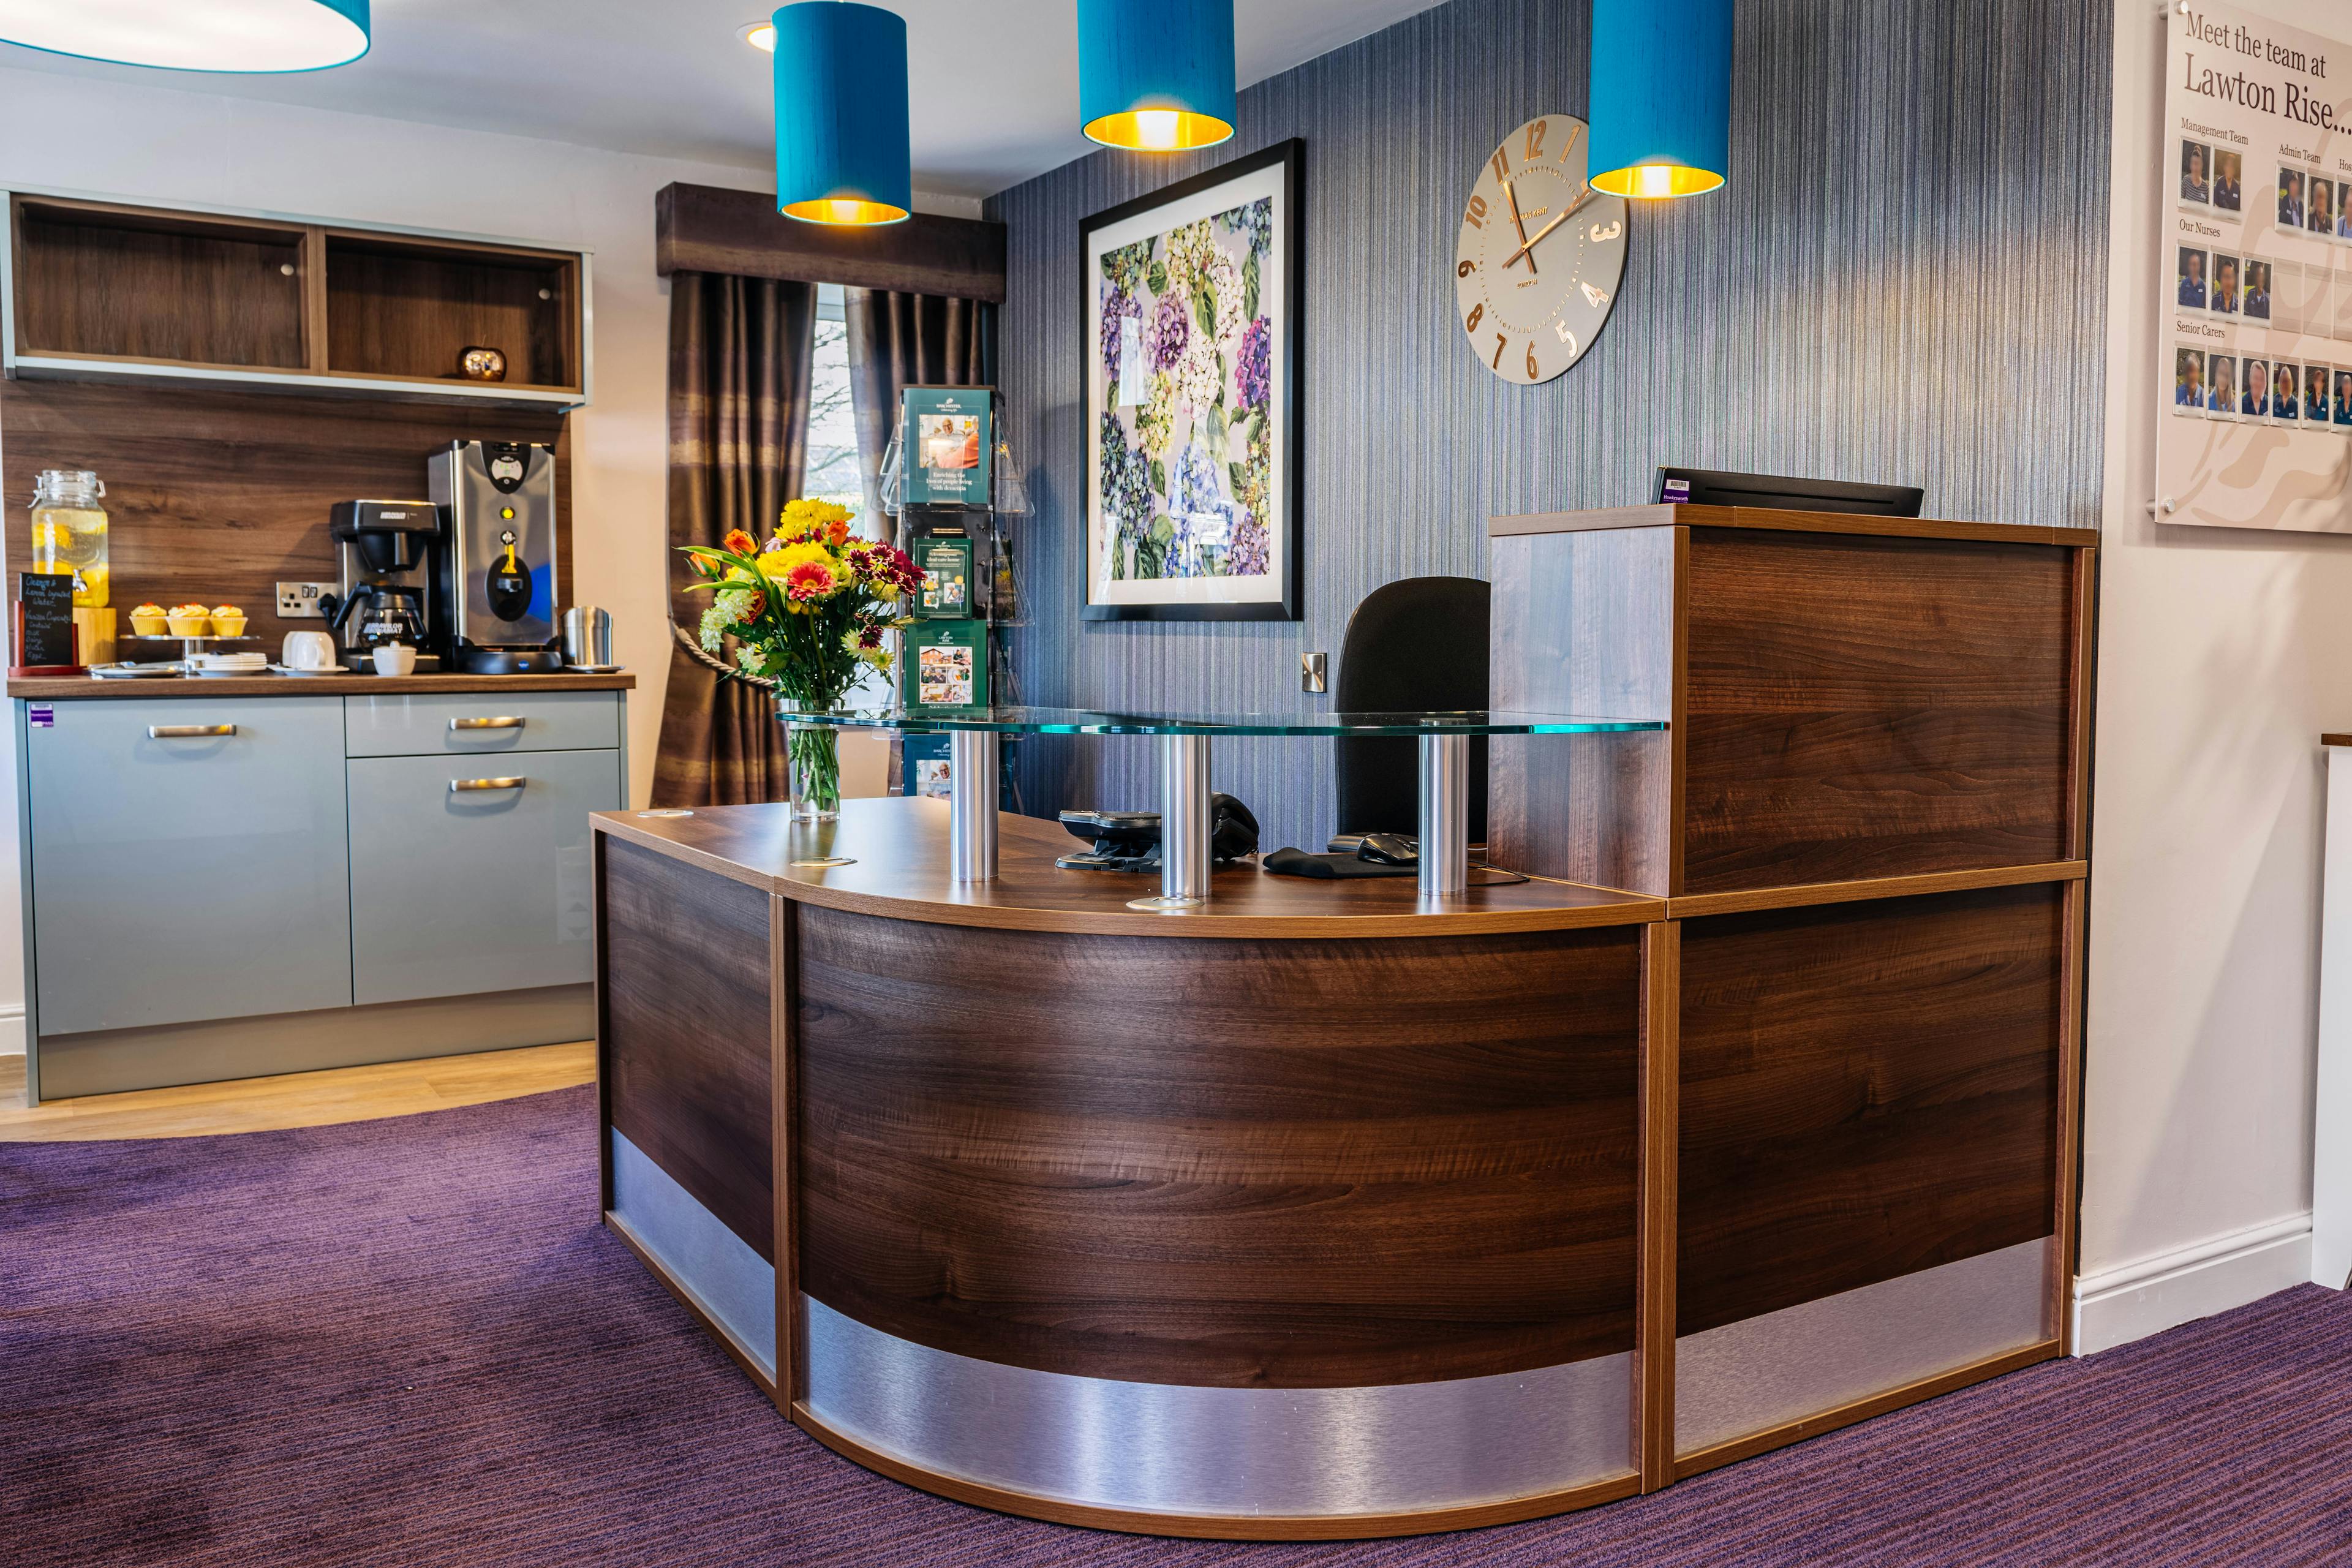 Reception of Lawton Rise Care Home in Stoke-on-Trent, Staffordshire